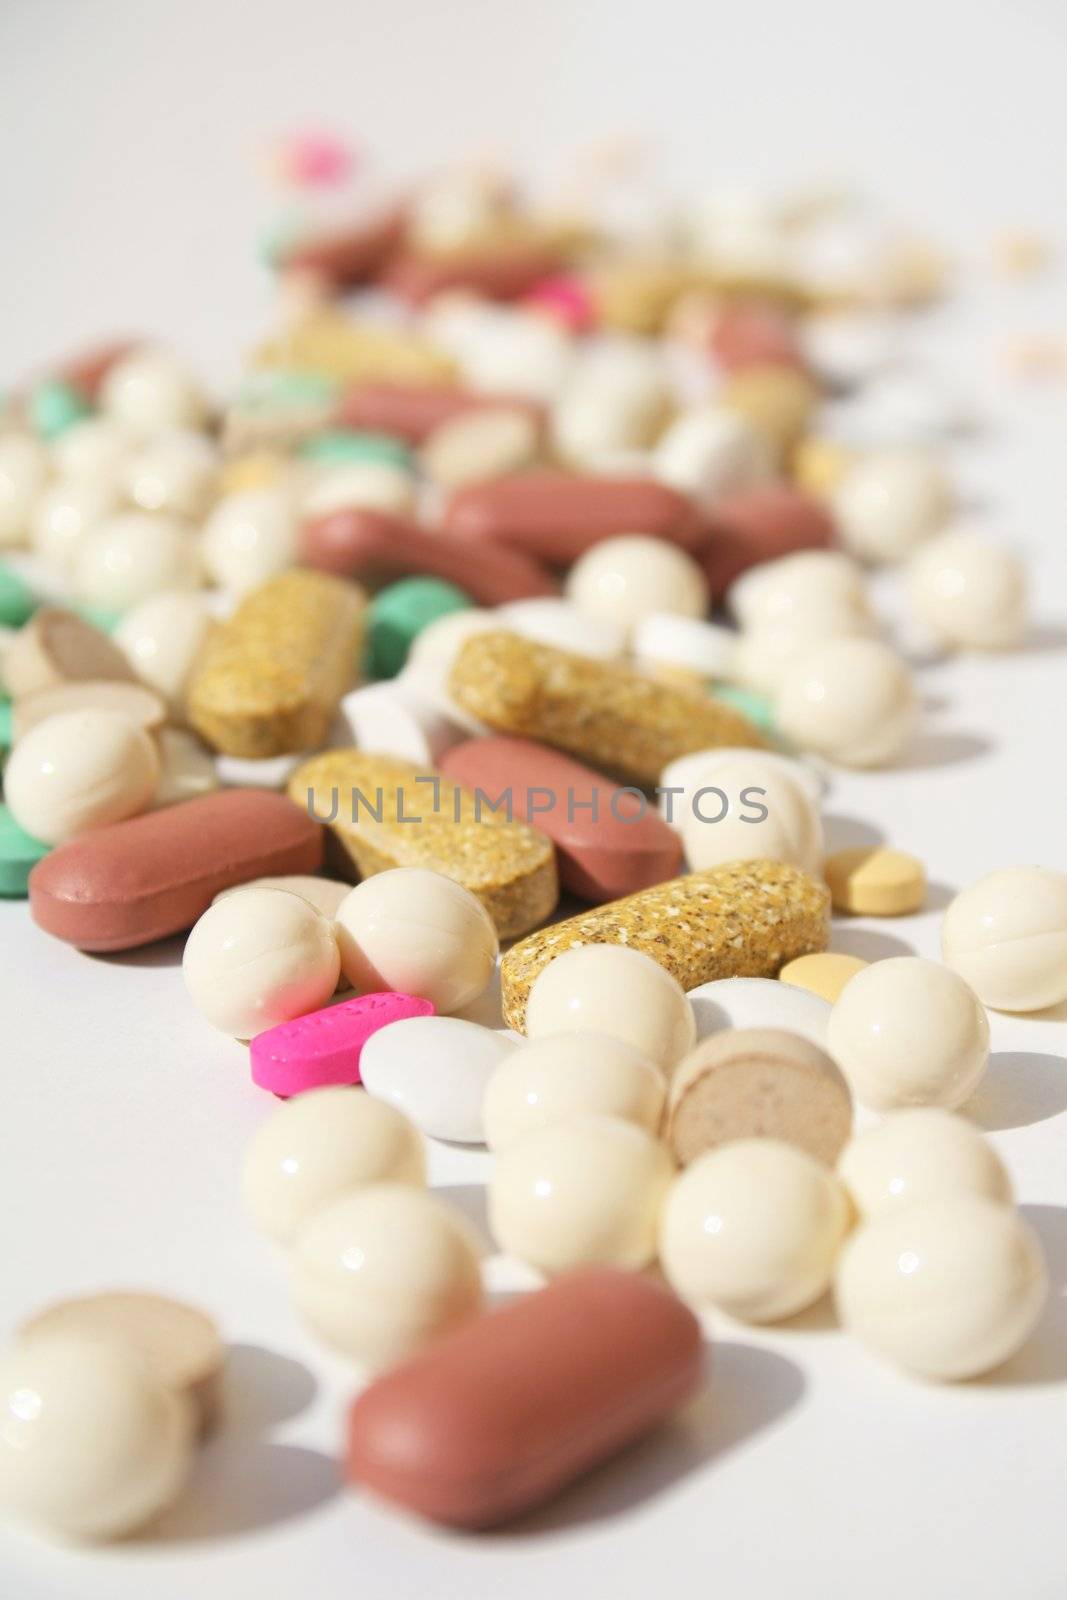 Pile of spilled pills by timscottrom